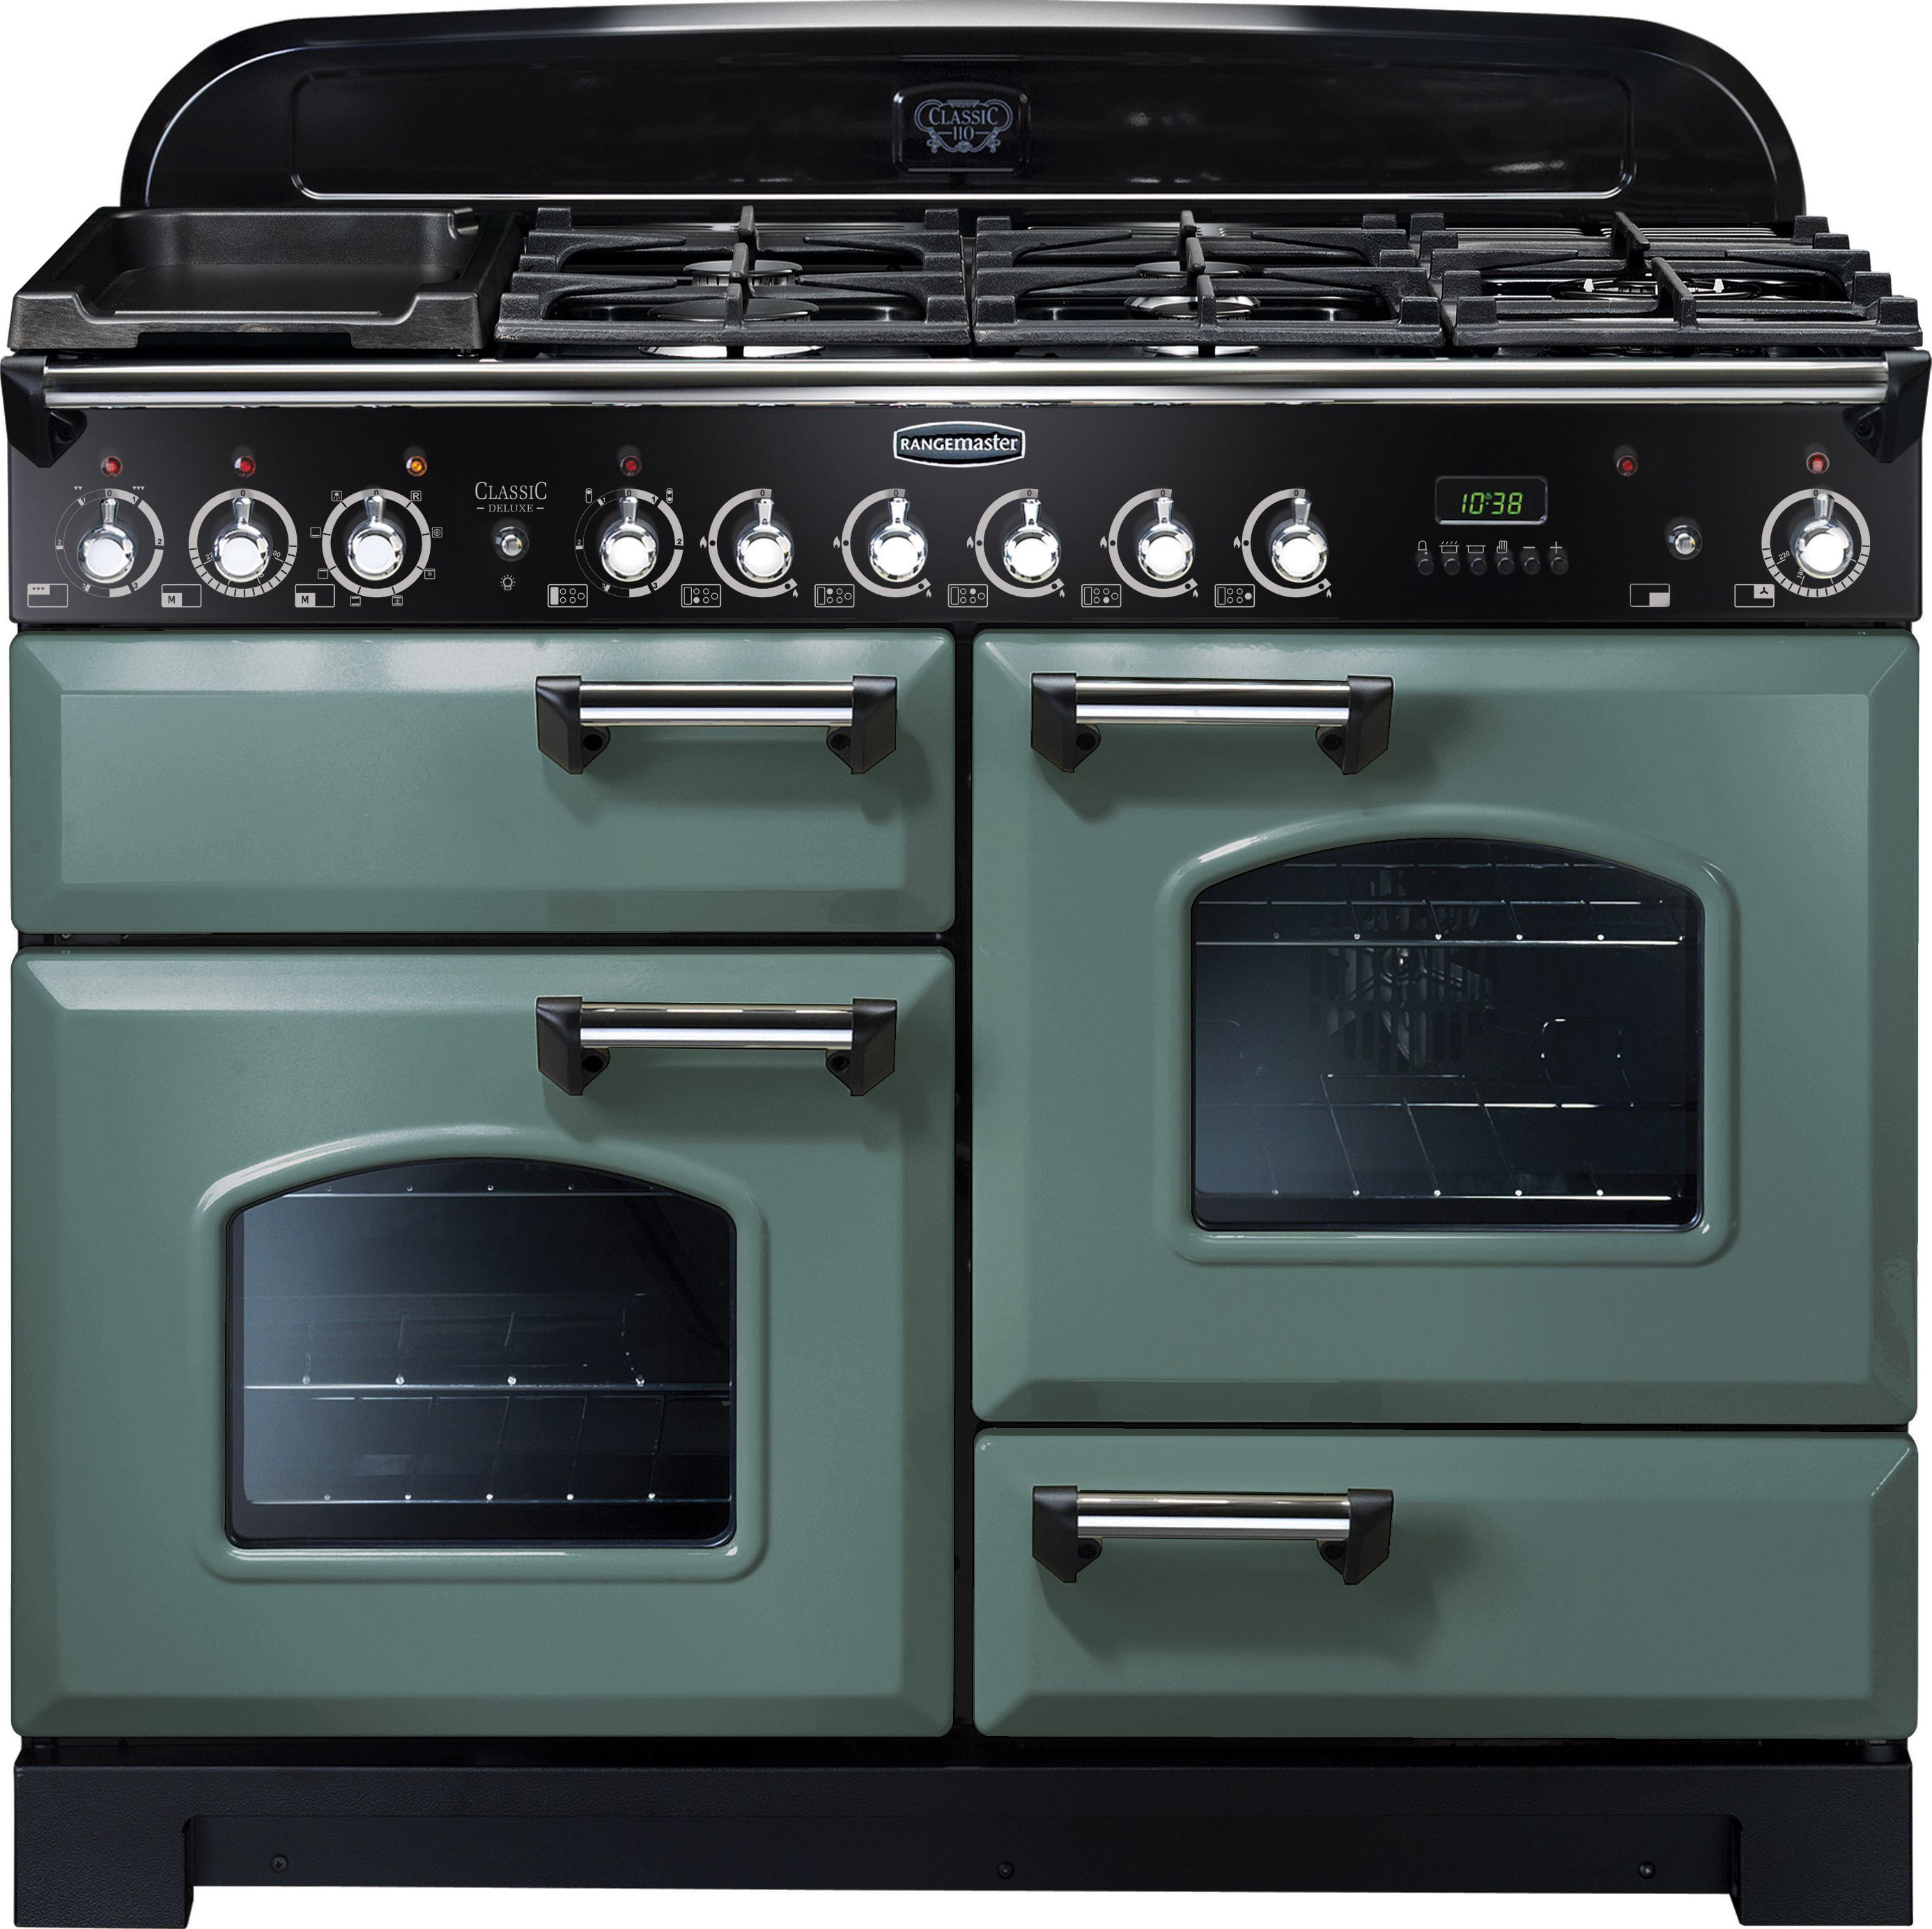 Rangemaster Classic Deluxe CDL110DFFMG/C 110cm Dual Fuel Range Cooker - Mineral Green / Chrome - A/A Rated, Green